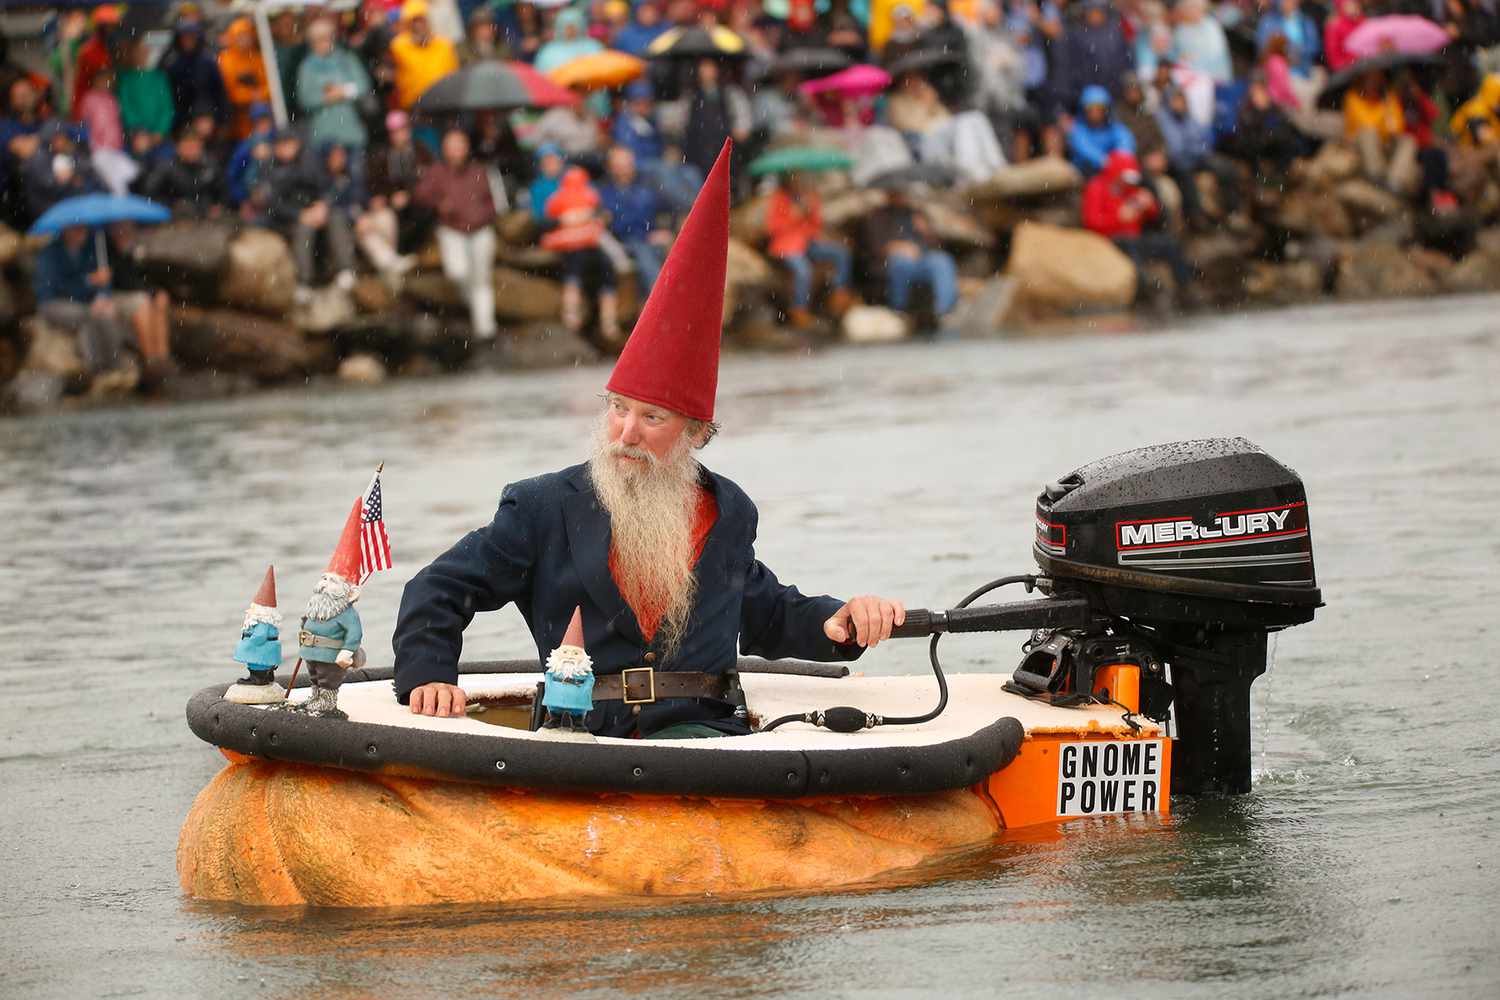 Tom Lishness of Windsor motors during the Powerboat division of the Pumpkin Regatta, part of the Pumpkinfest in Damariscotta